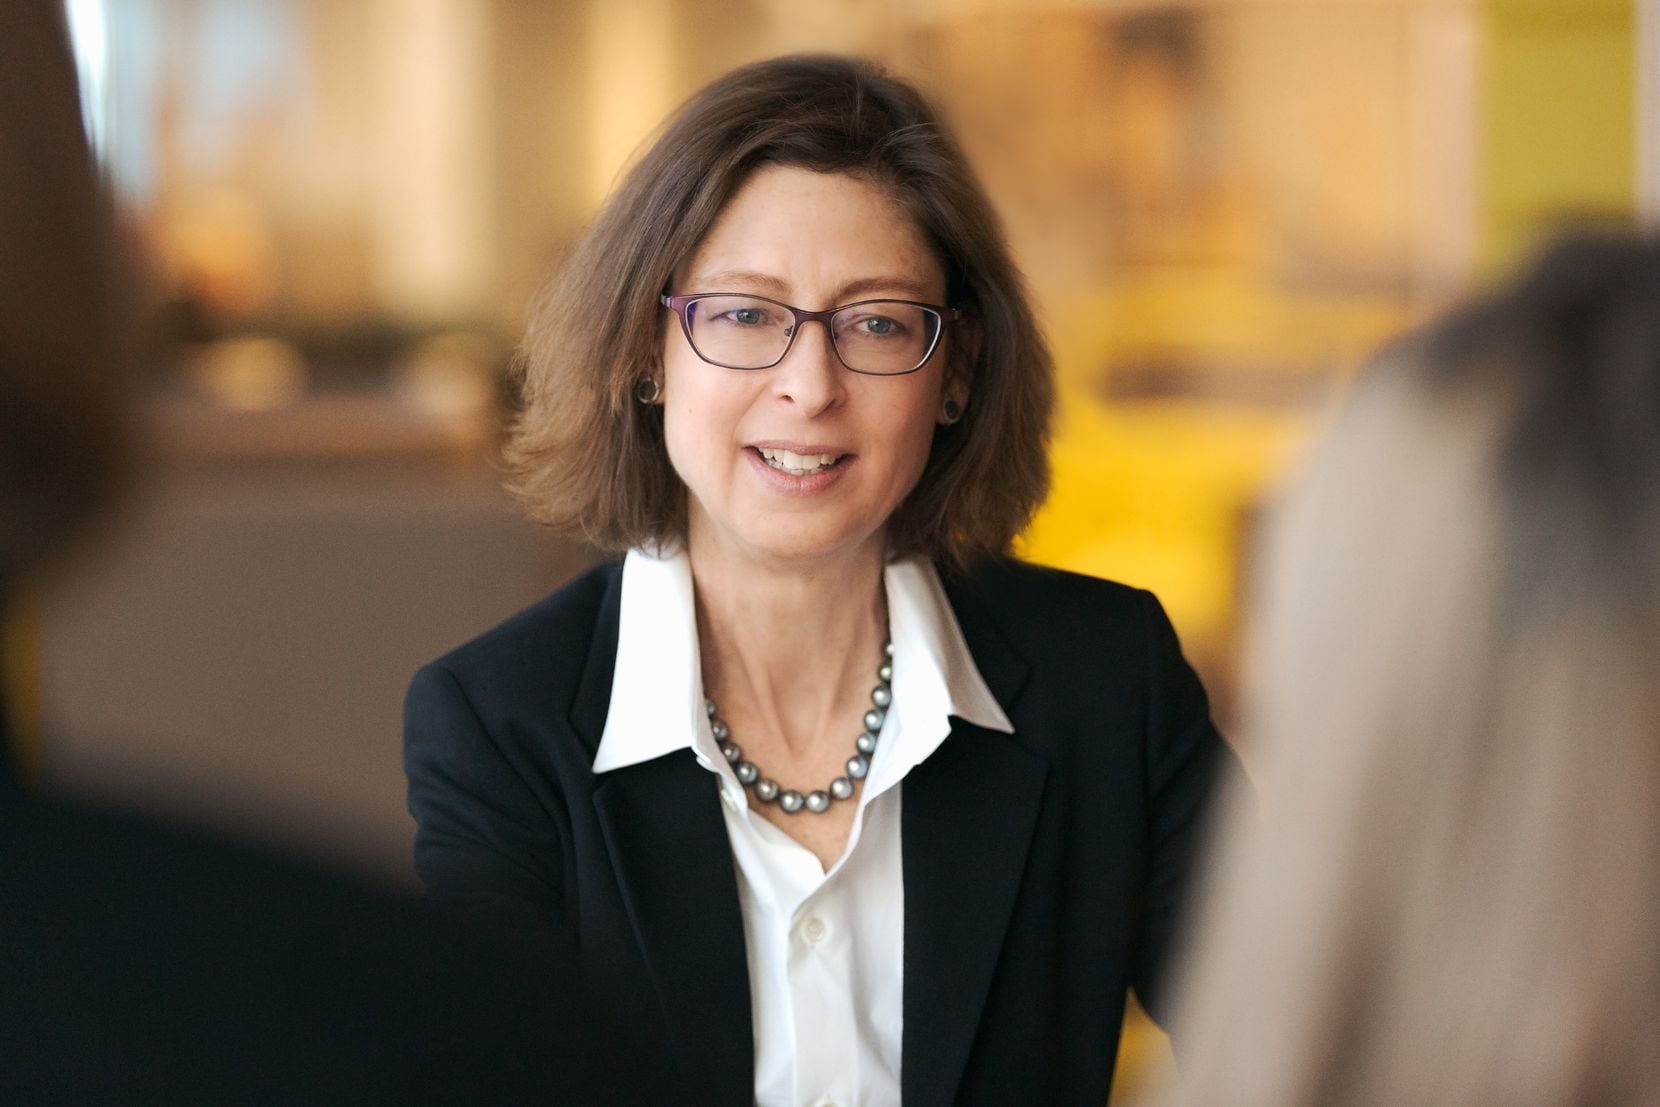 Abby Johnson runs Boston-based financial giant Fidelity Investments, which has 6,000...